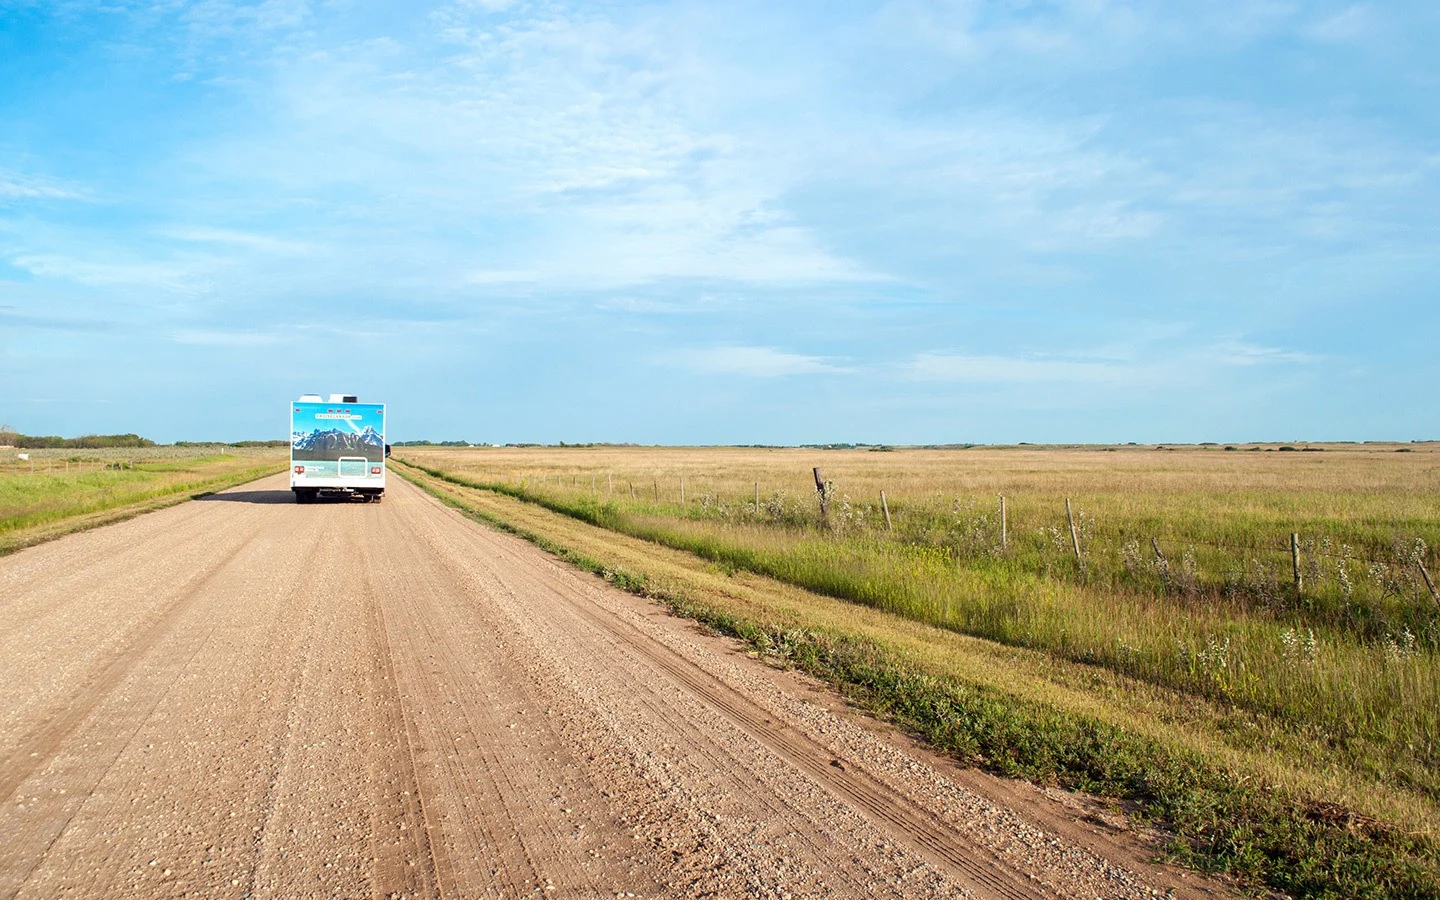 RVing in Canada on an unsealed road in the Prairies